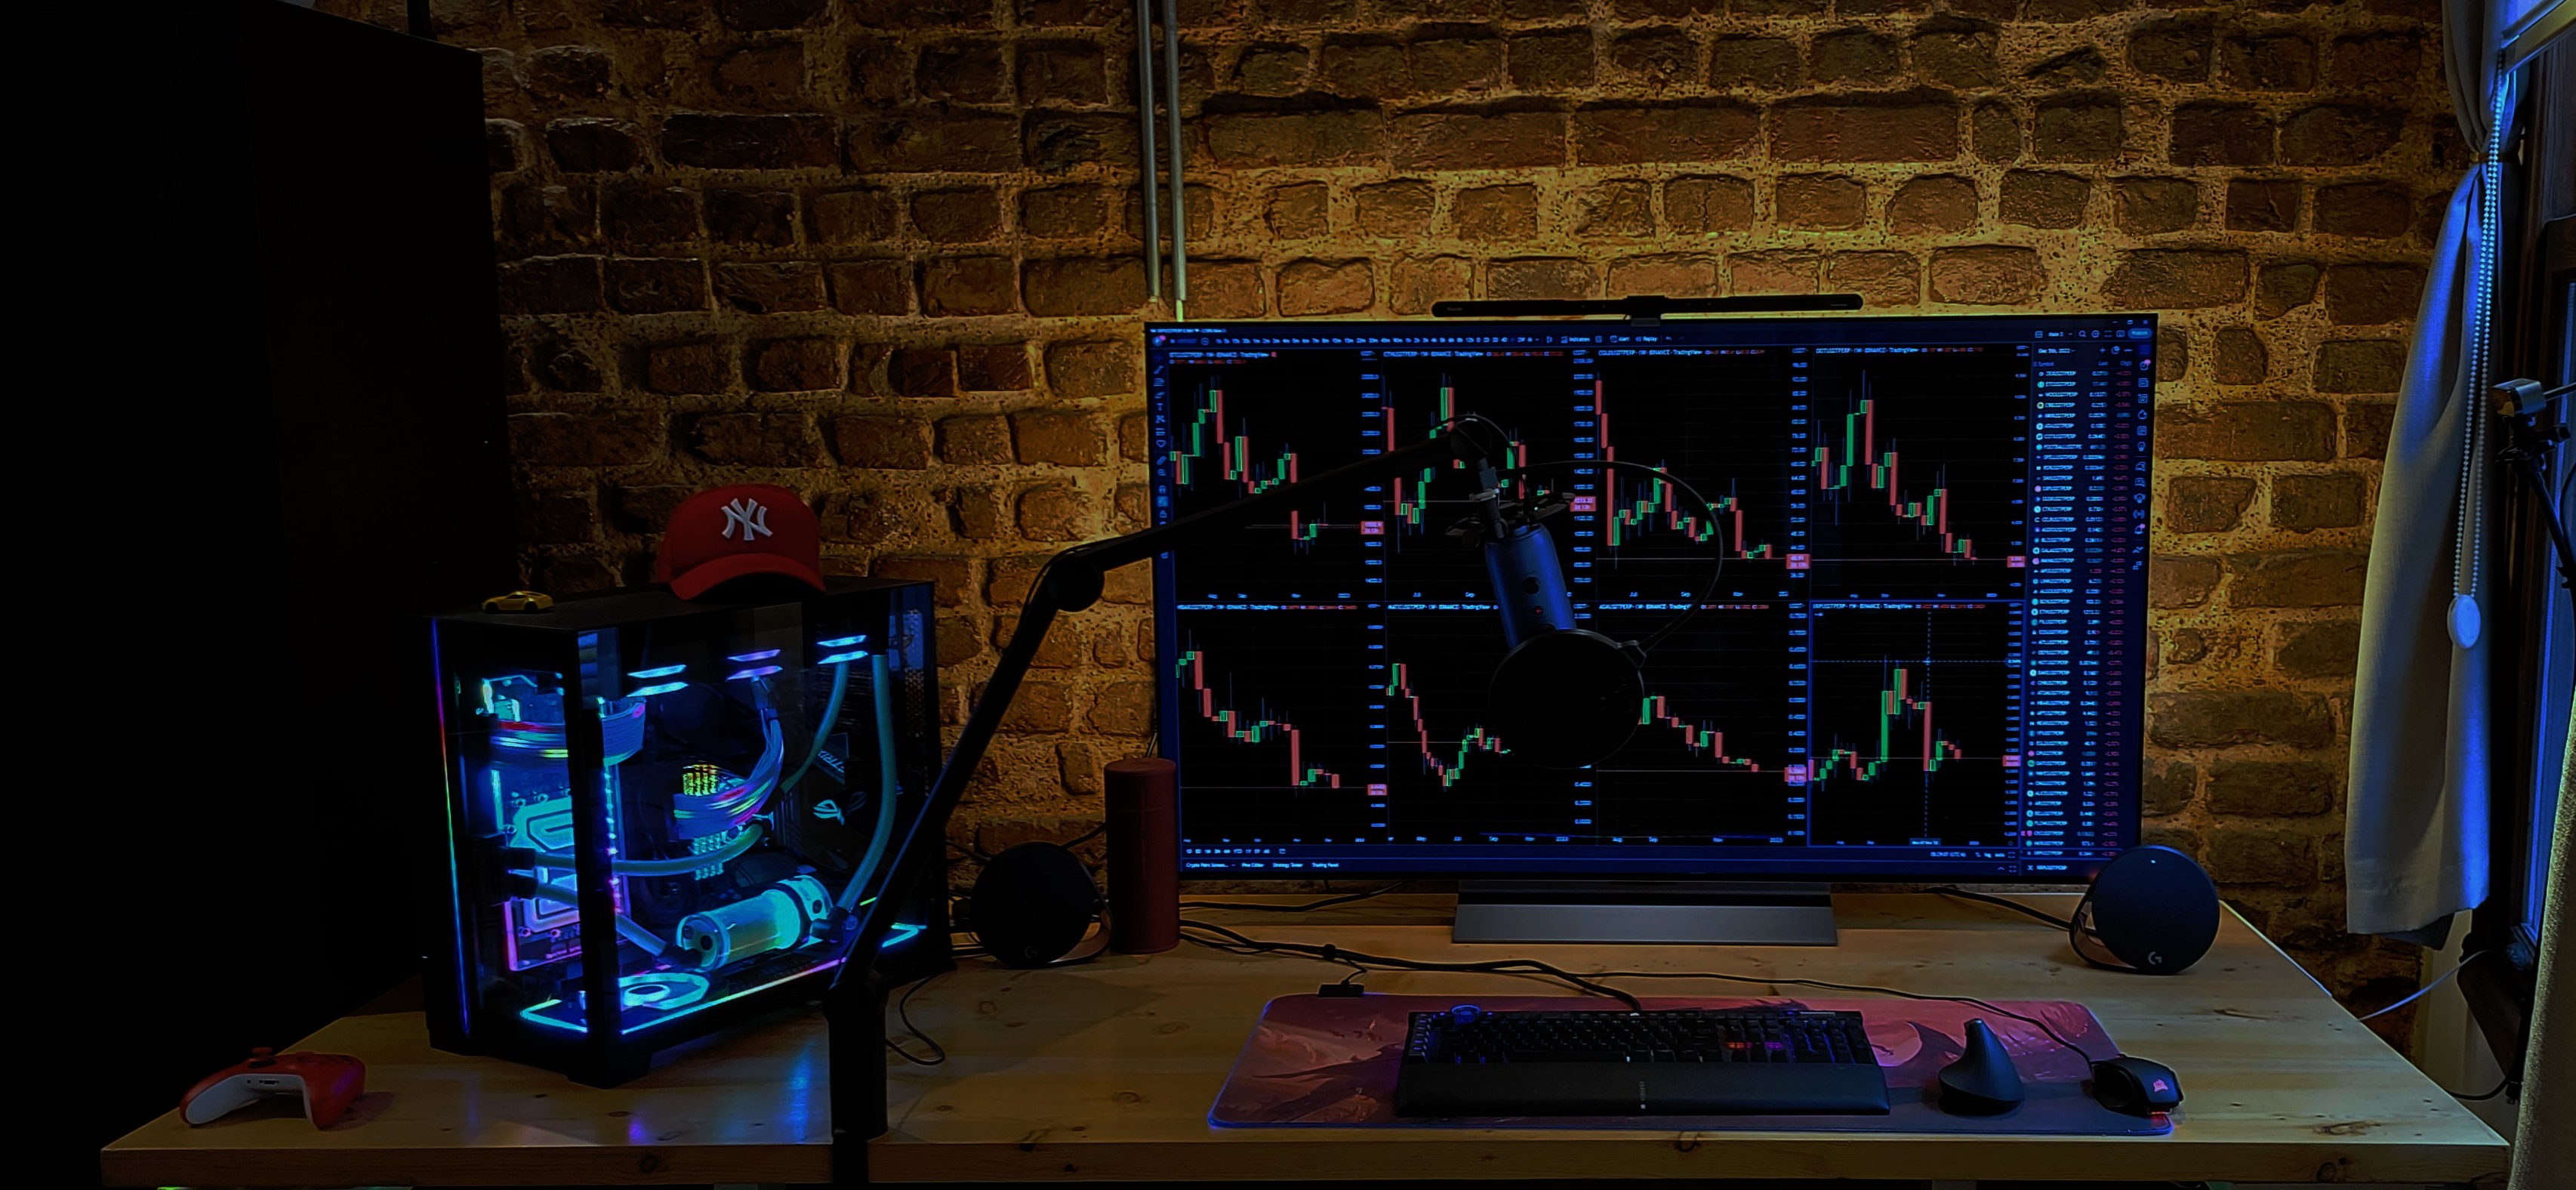 day trading, cryptocurrency, bitcoin, custom built computer, water cooling